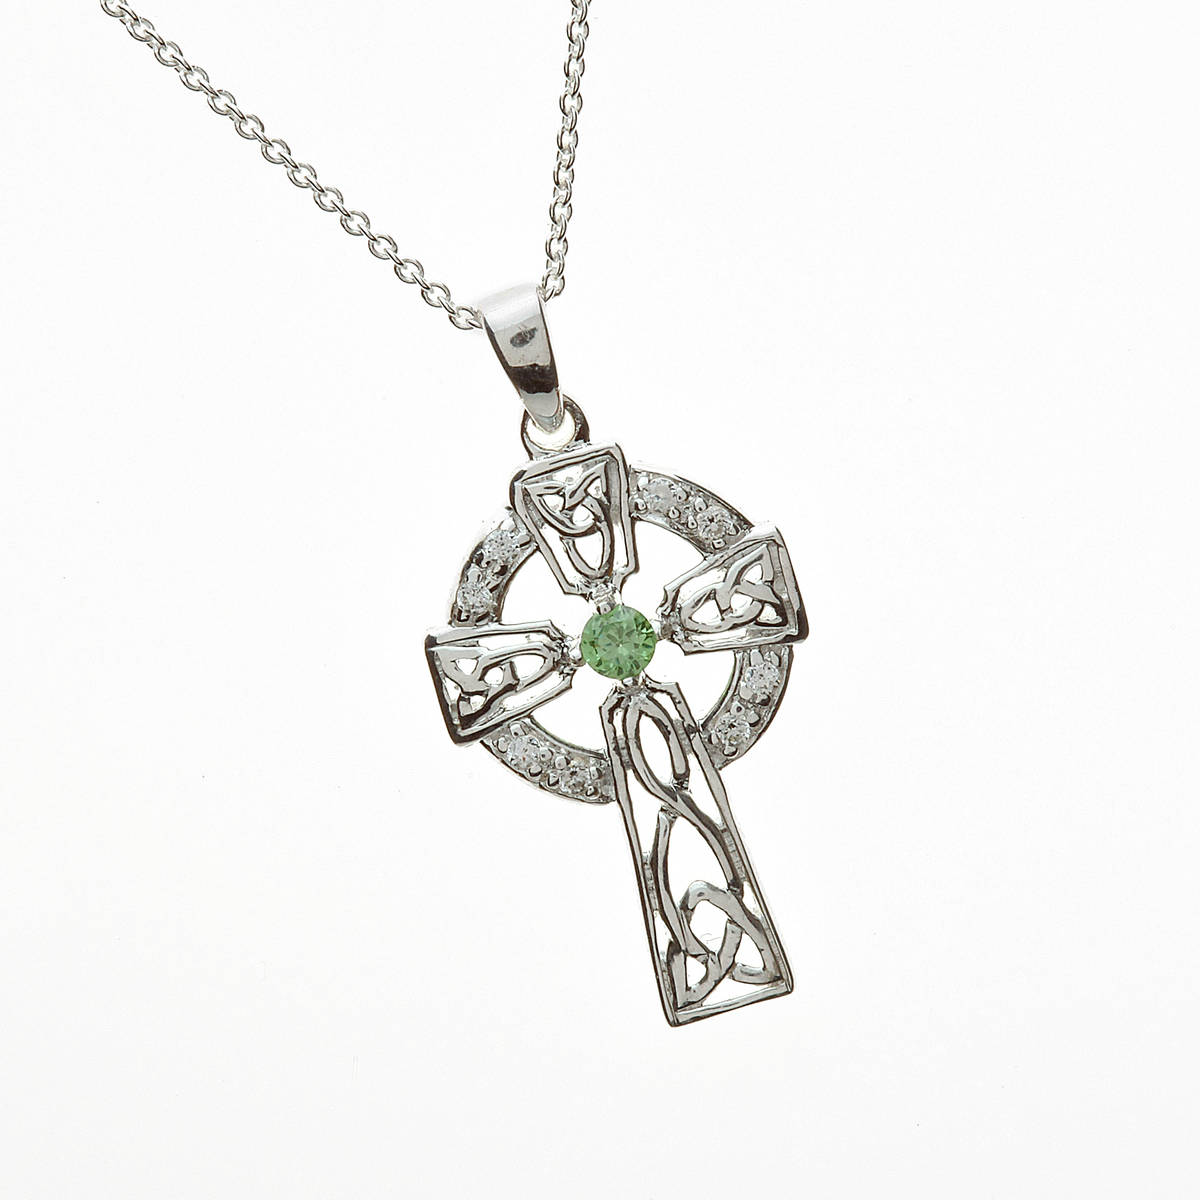 Silver Cz Cross With Green Cz Centre 18" Trace